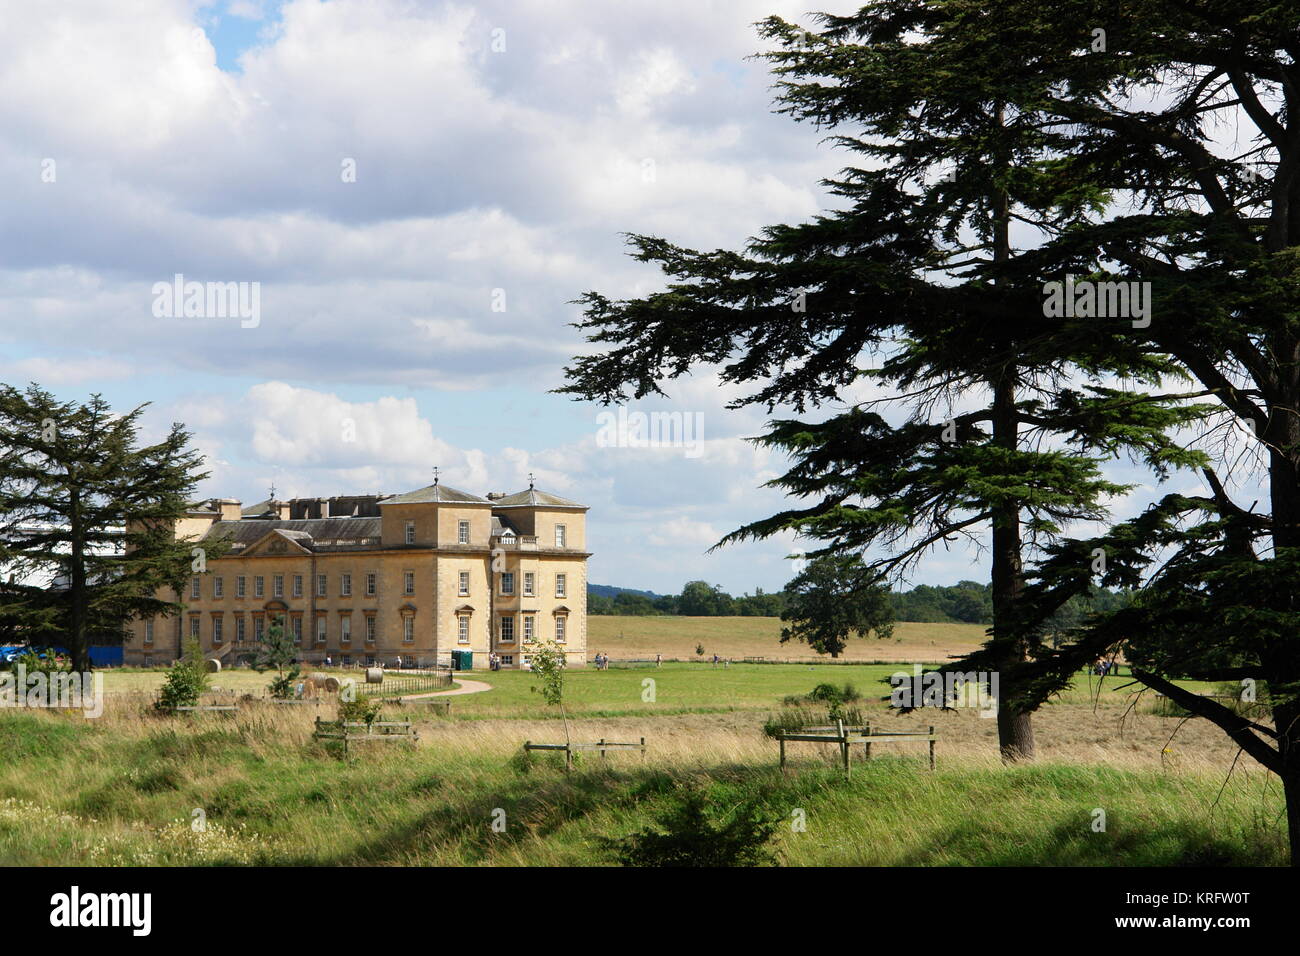 General view of Croome Court, near Besford, Worcestershire. The house was designed by Capability Brown, with interiors by Robert Adam.     Date: 2012 Stock Photo